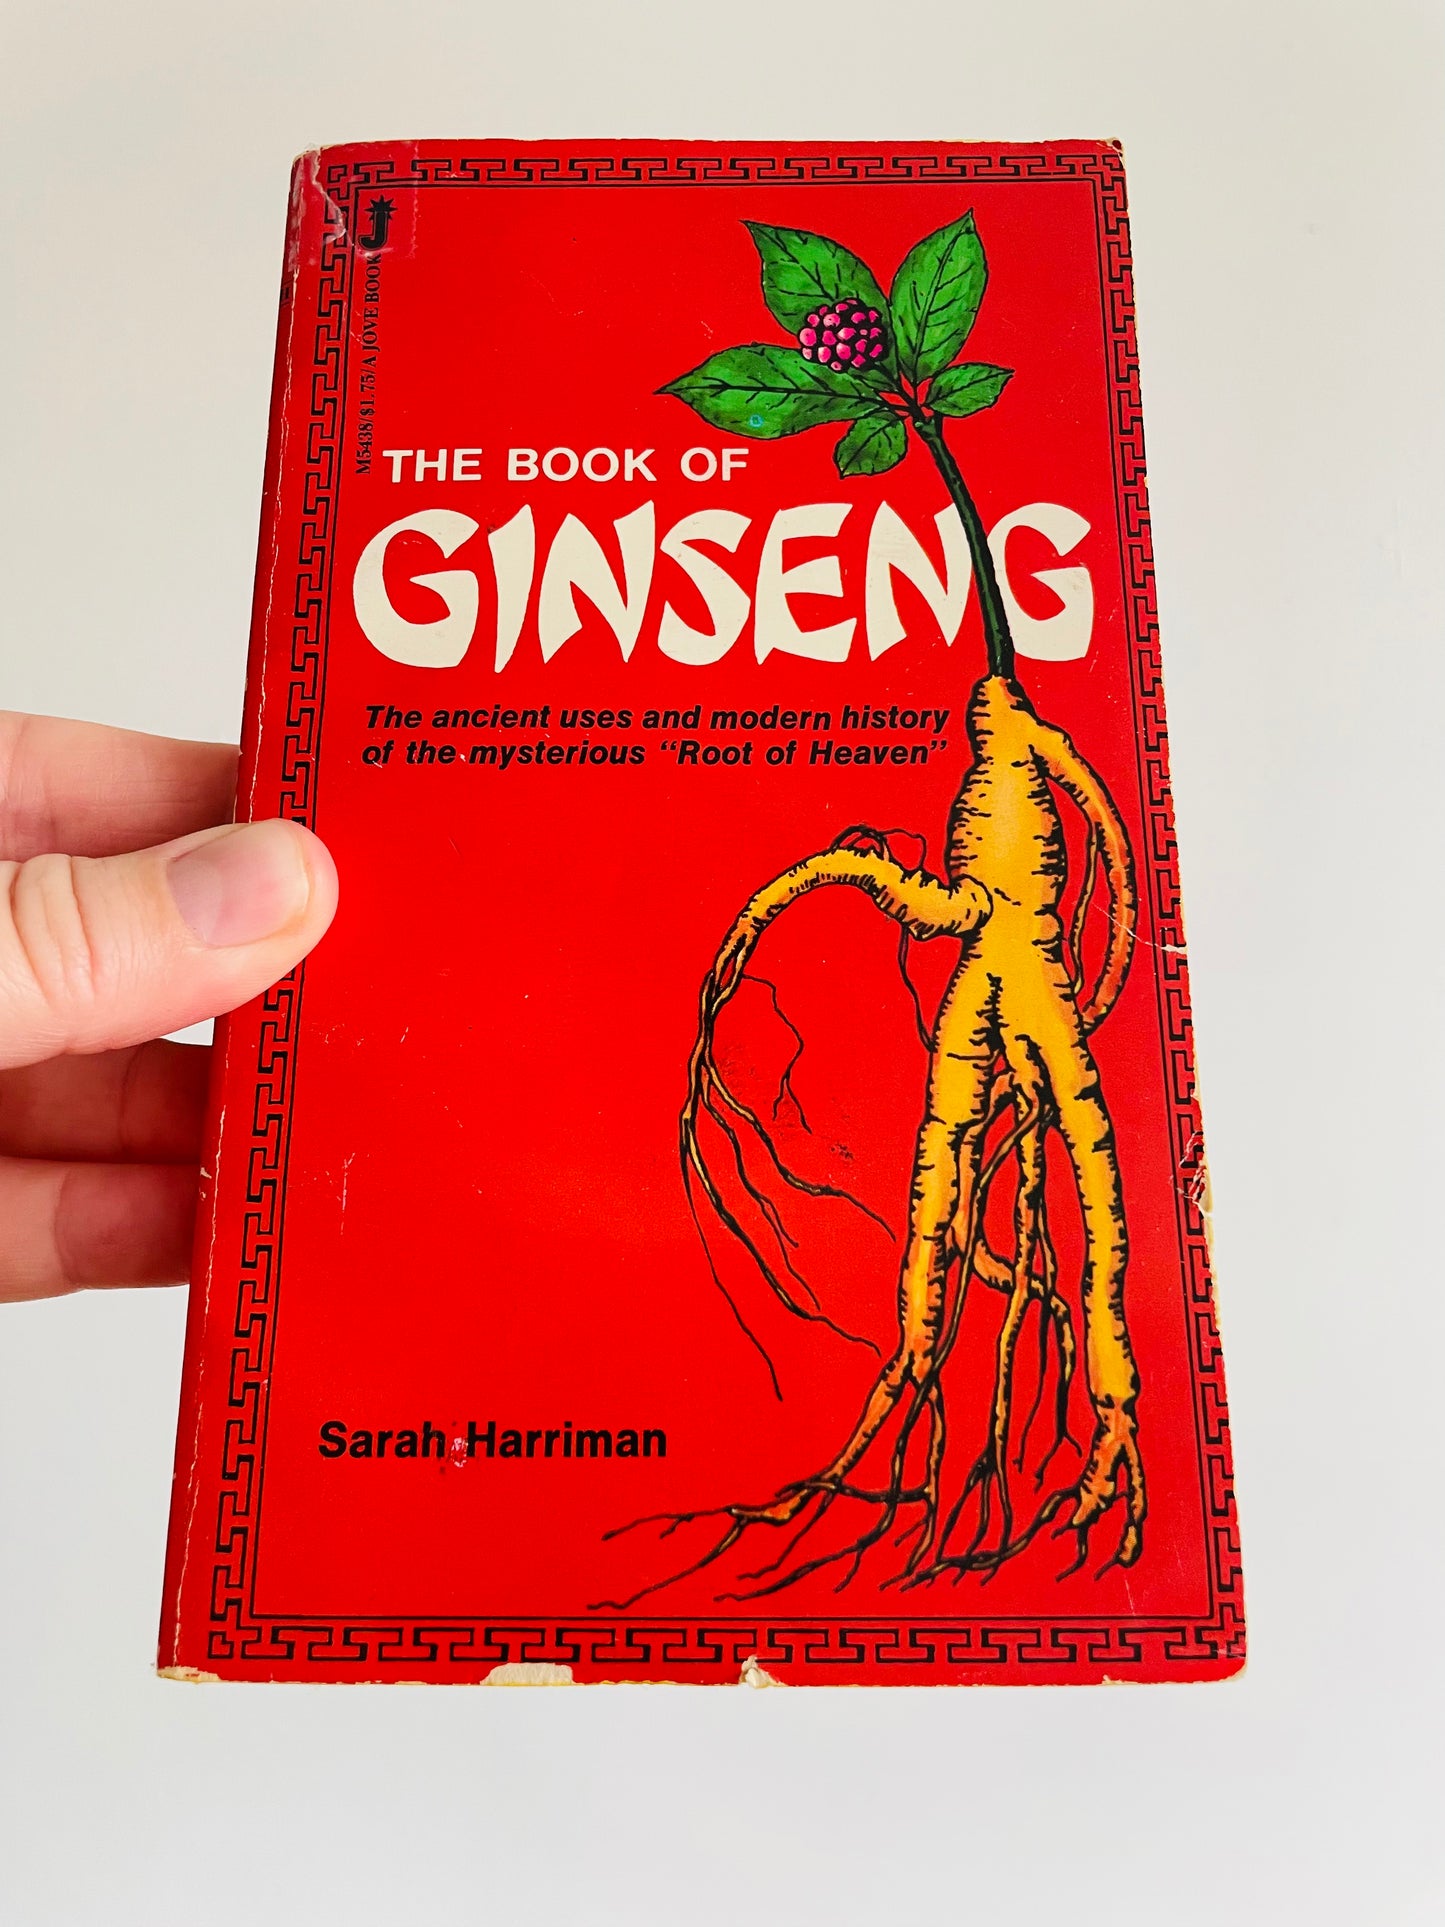 The Book of Ginseng Paperback Book by Sarah Harriman (1977)